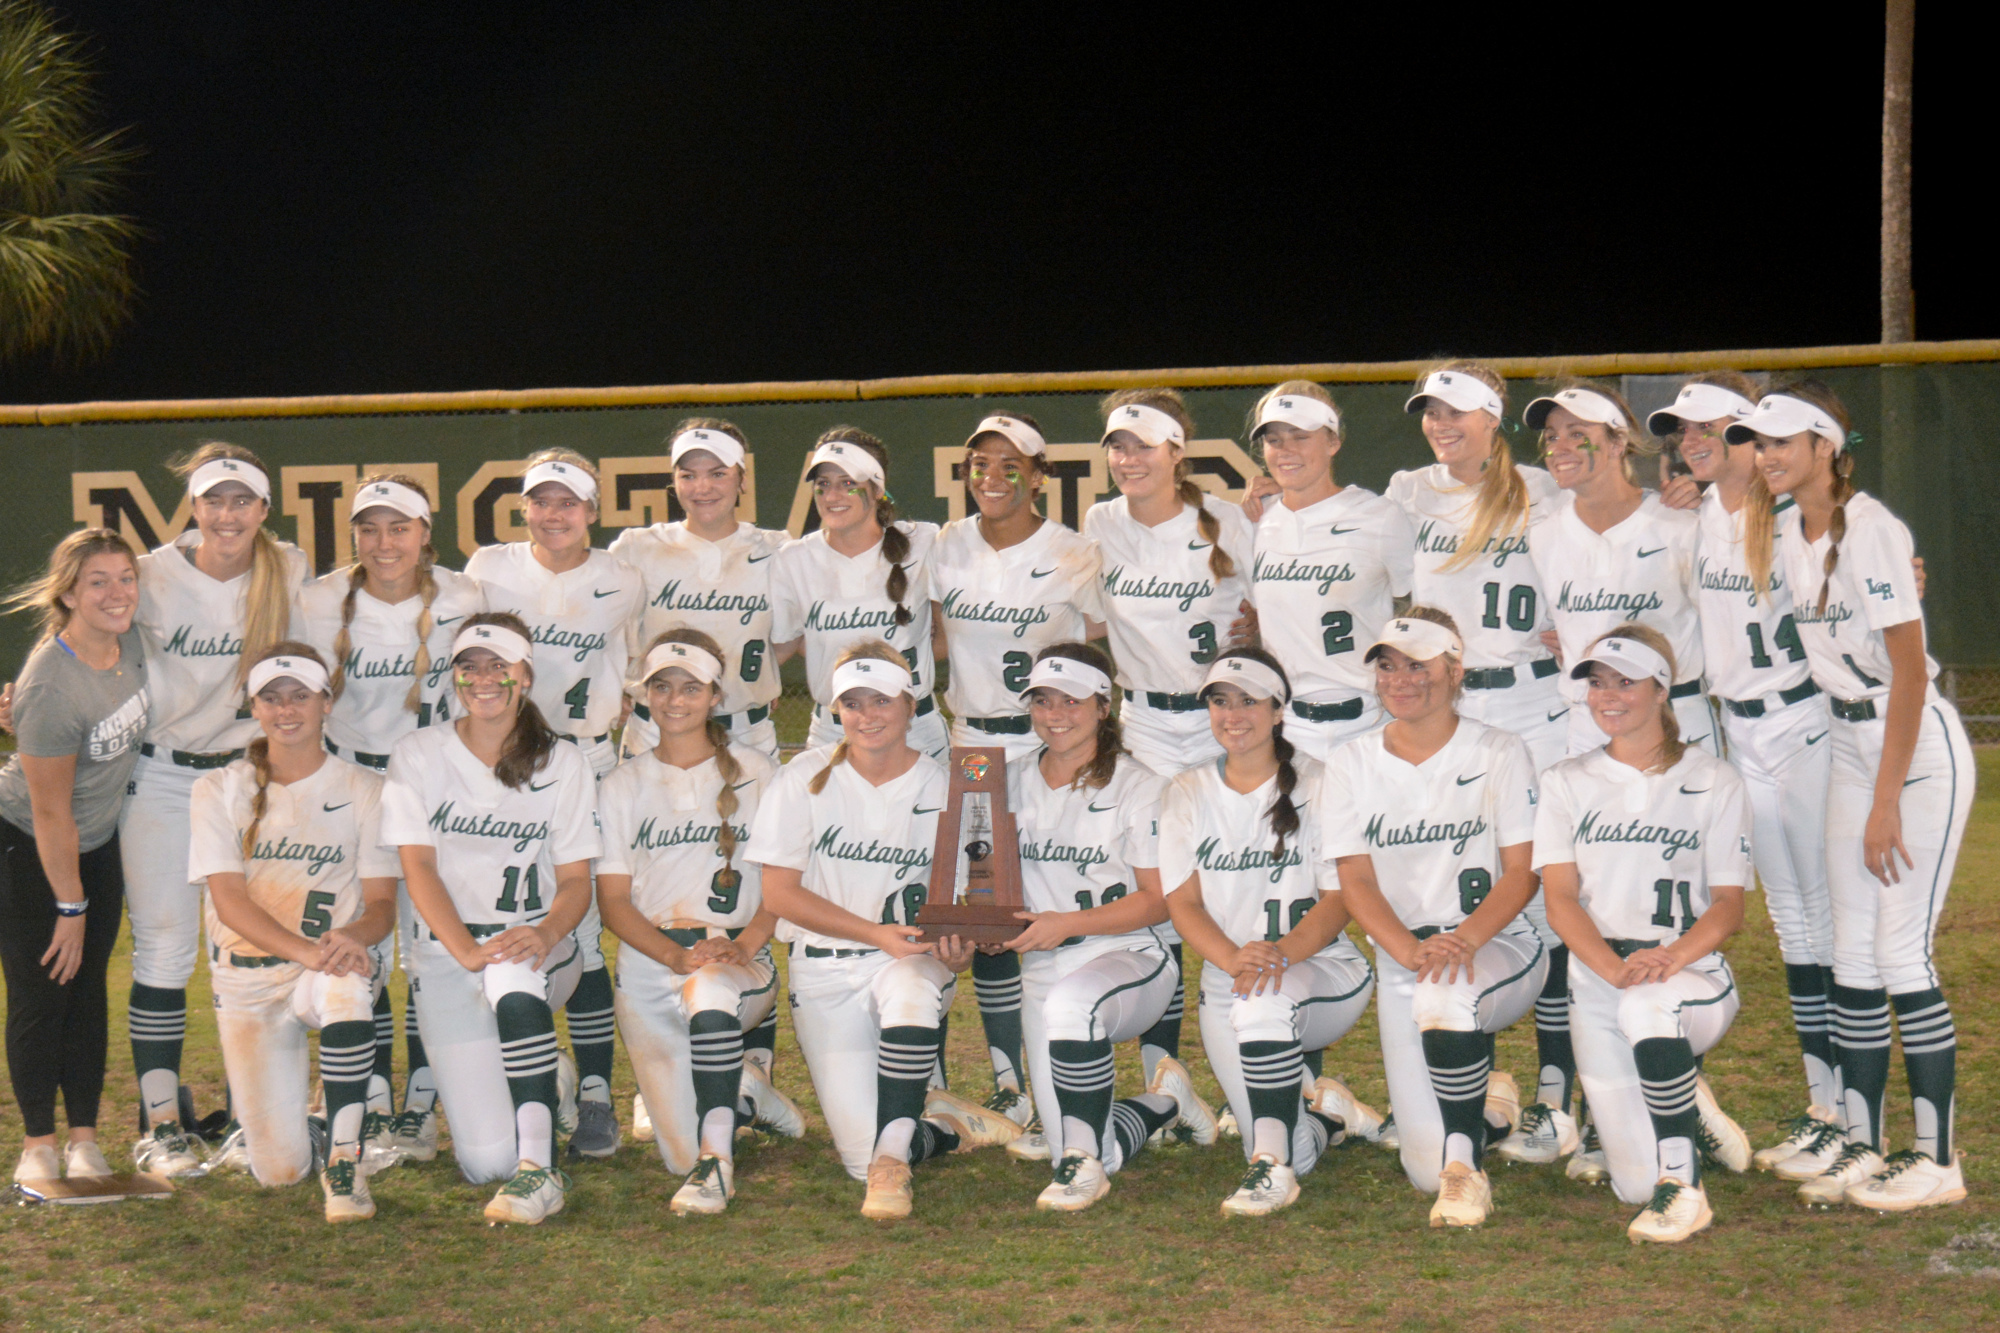 Lakewood Ranch (28-2) will play Western High (16-8-1) at 12:30 p.m. Friday at Legends Way Ball Fields in Clermont in a FHSAA Class 7A state semifinal.